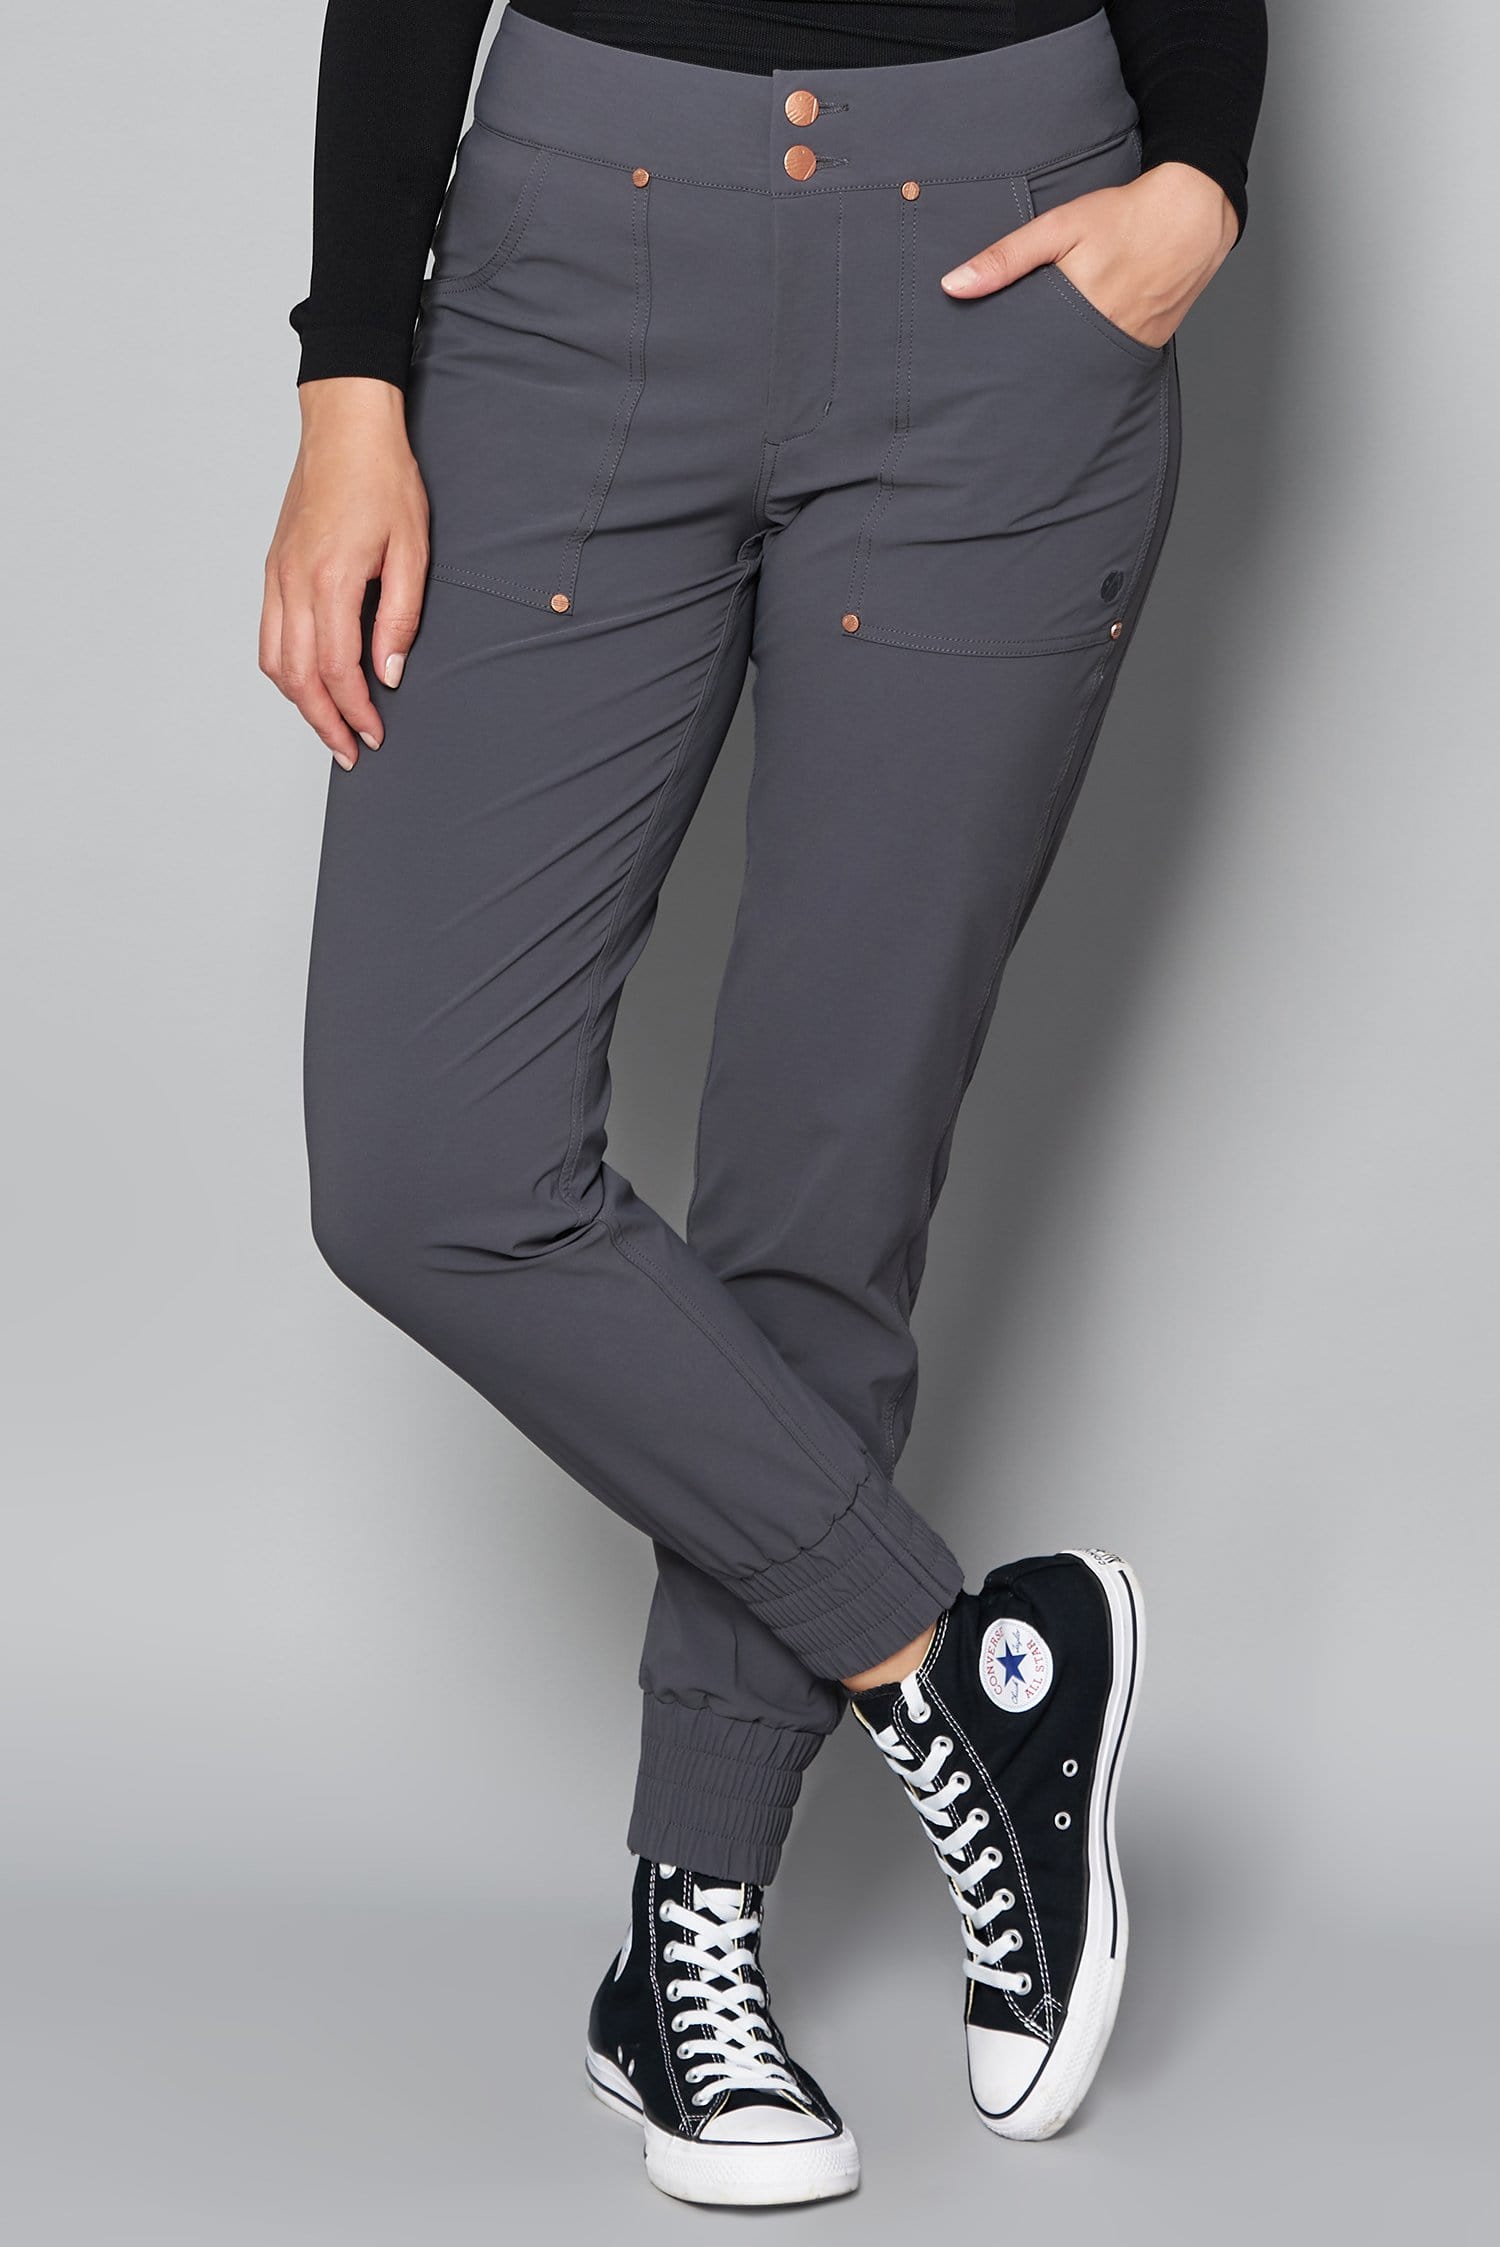 Casual Stroll Pants - Storm Grey Trousers  